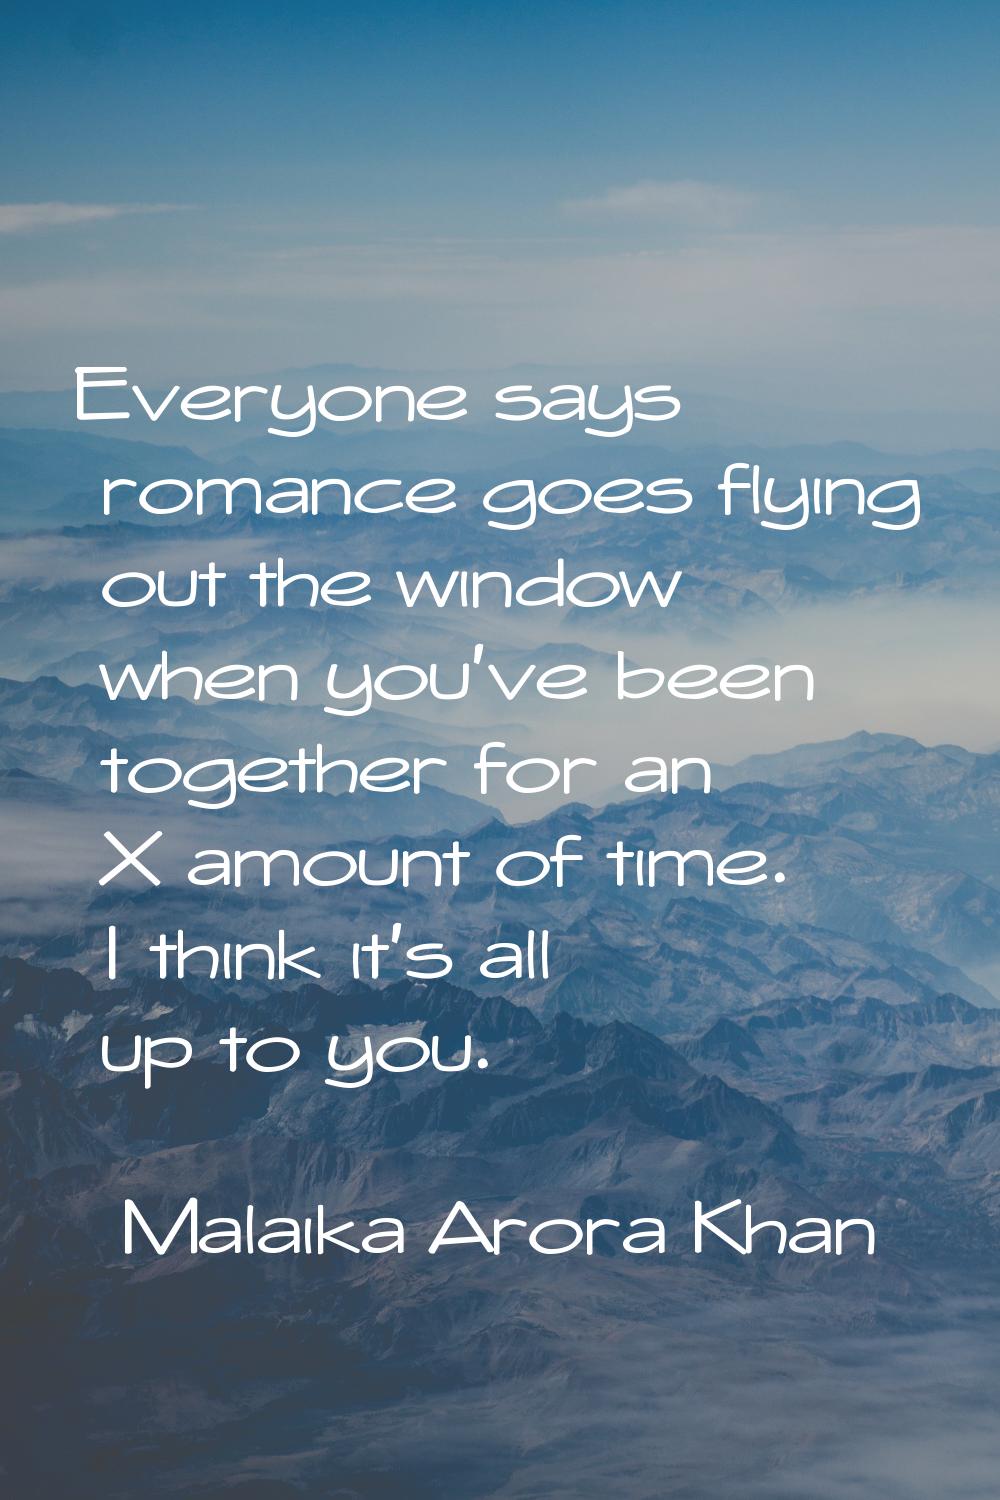 Everyone says romance goes flying out the window when you've been together for an X amount of time.